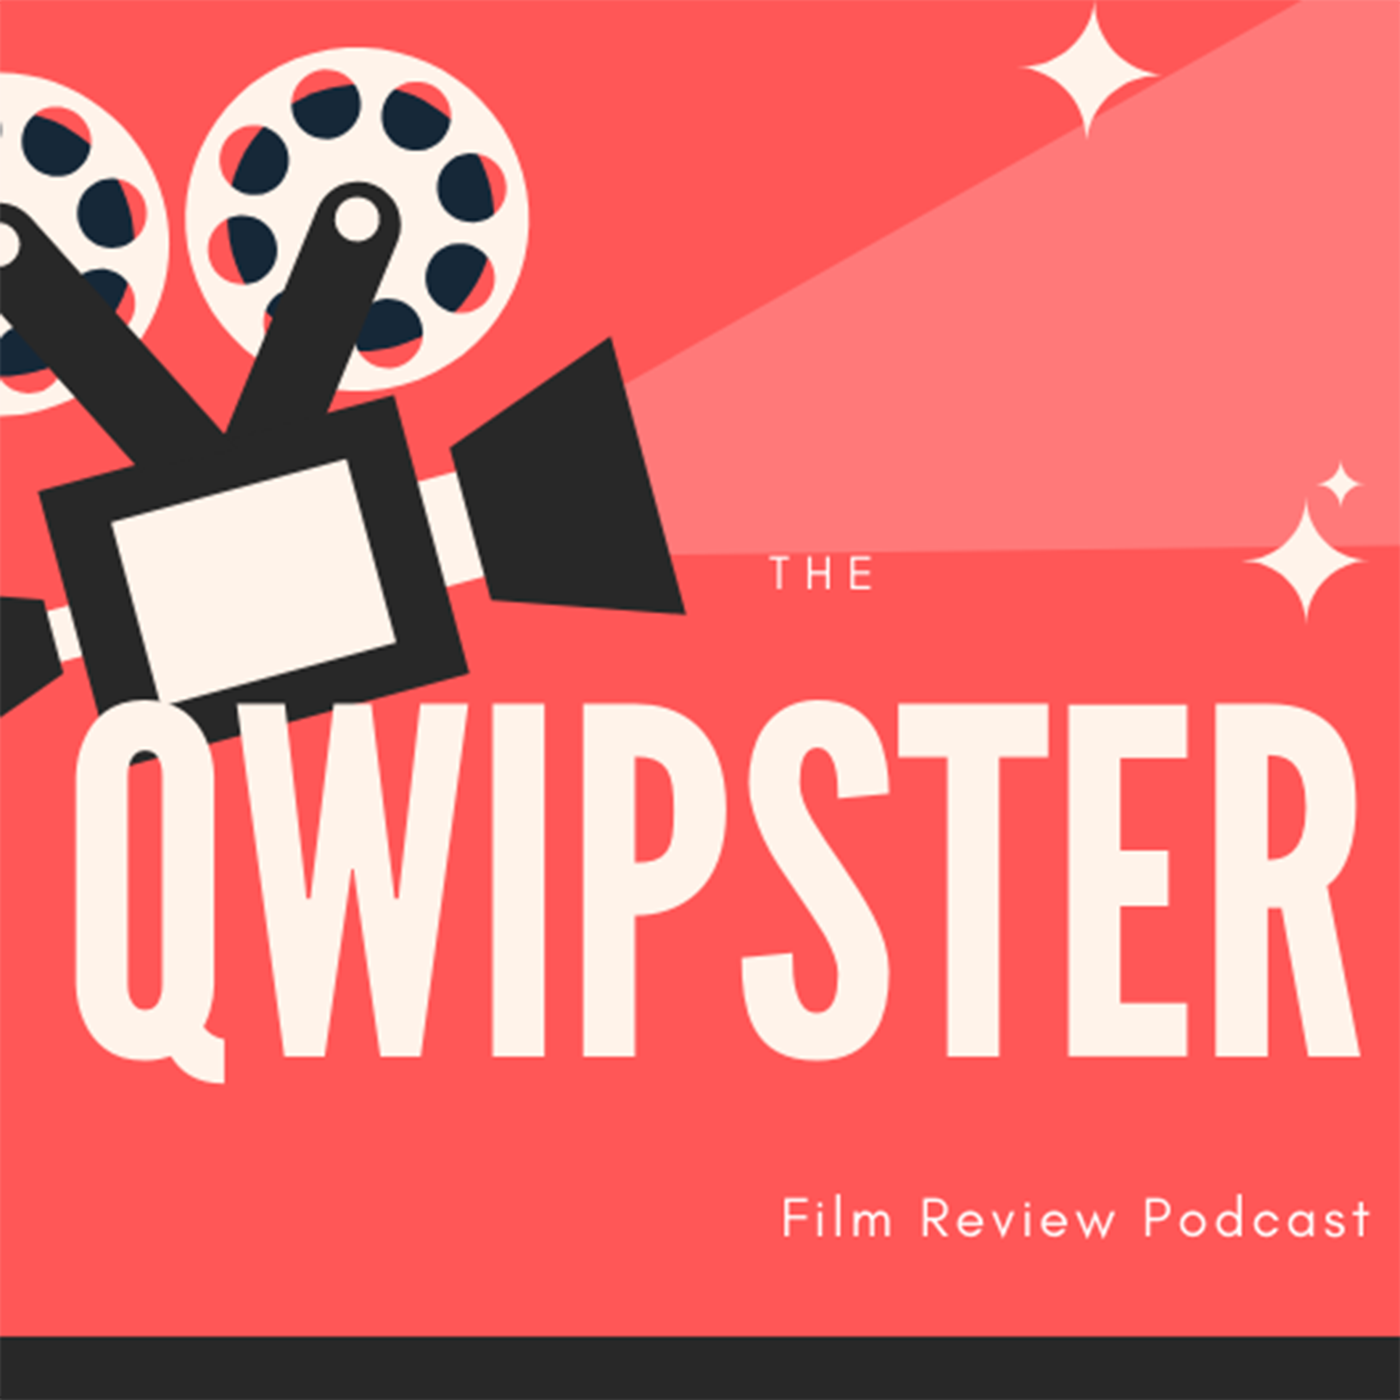 The Qwipster Film Review Podcast